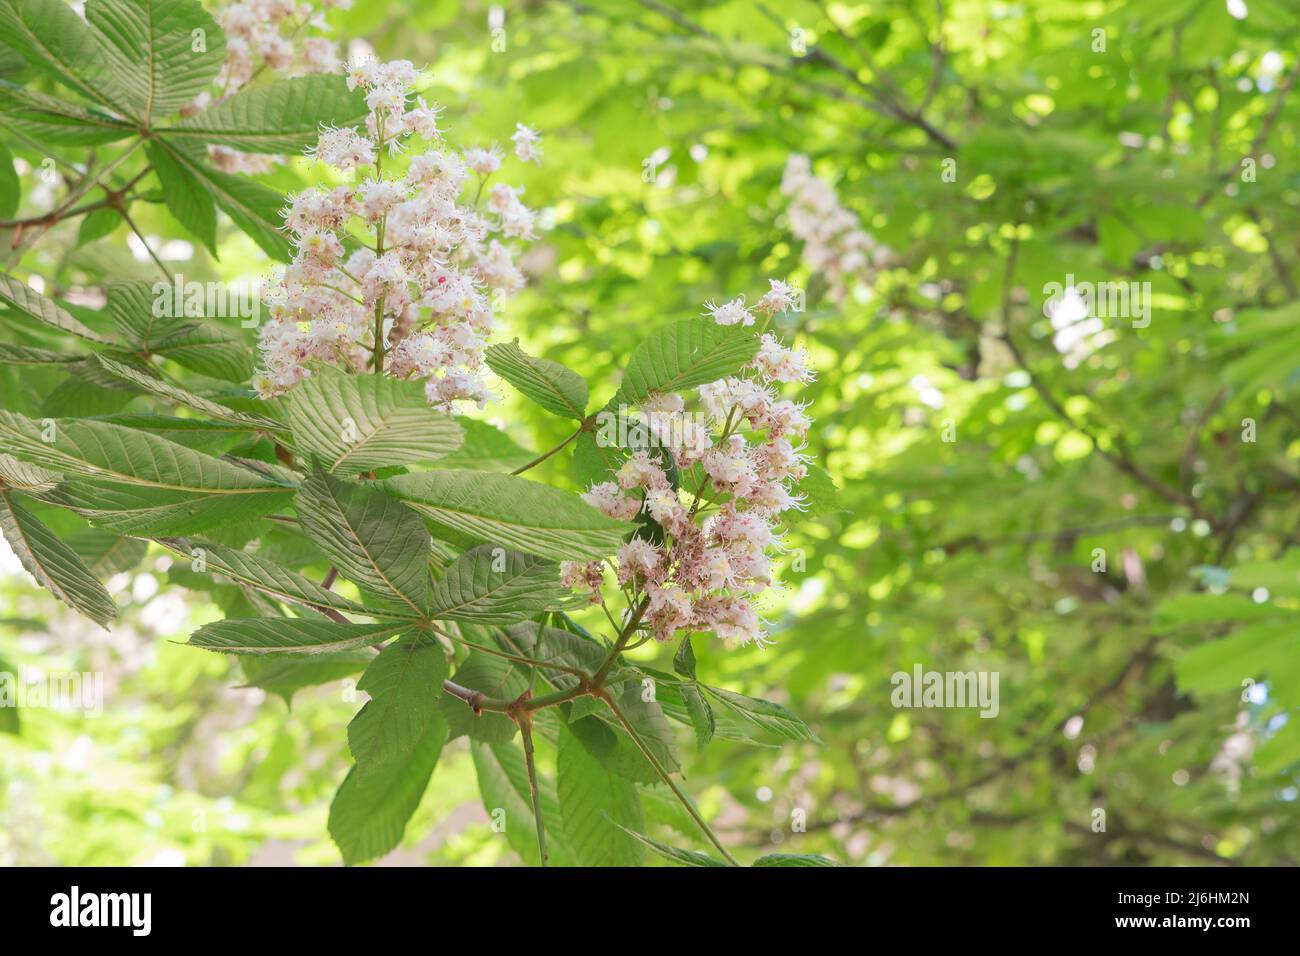 Horse chestnut tree flowers blossomed in spring Stock Photo